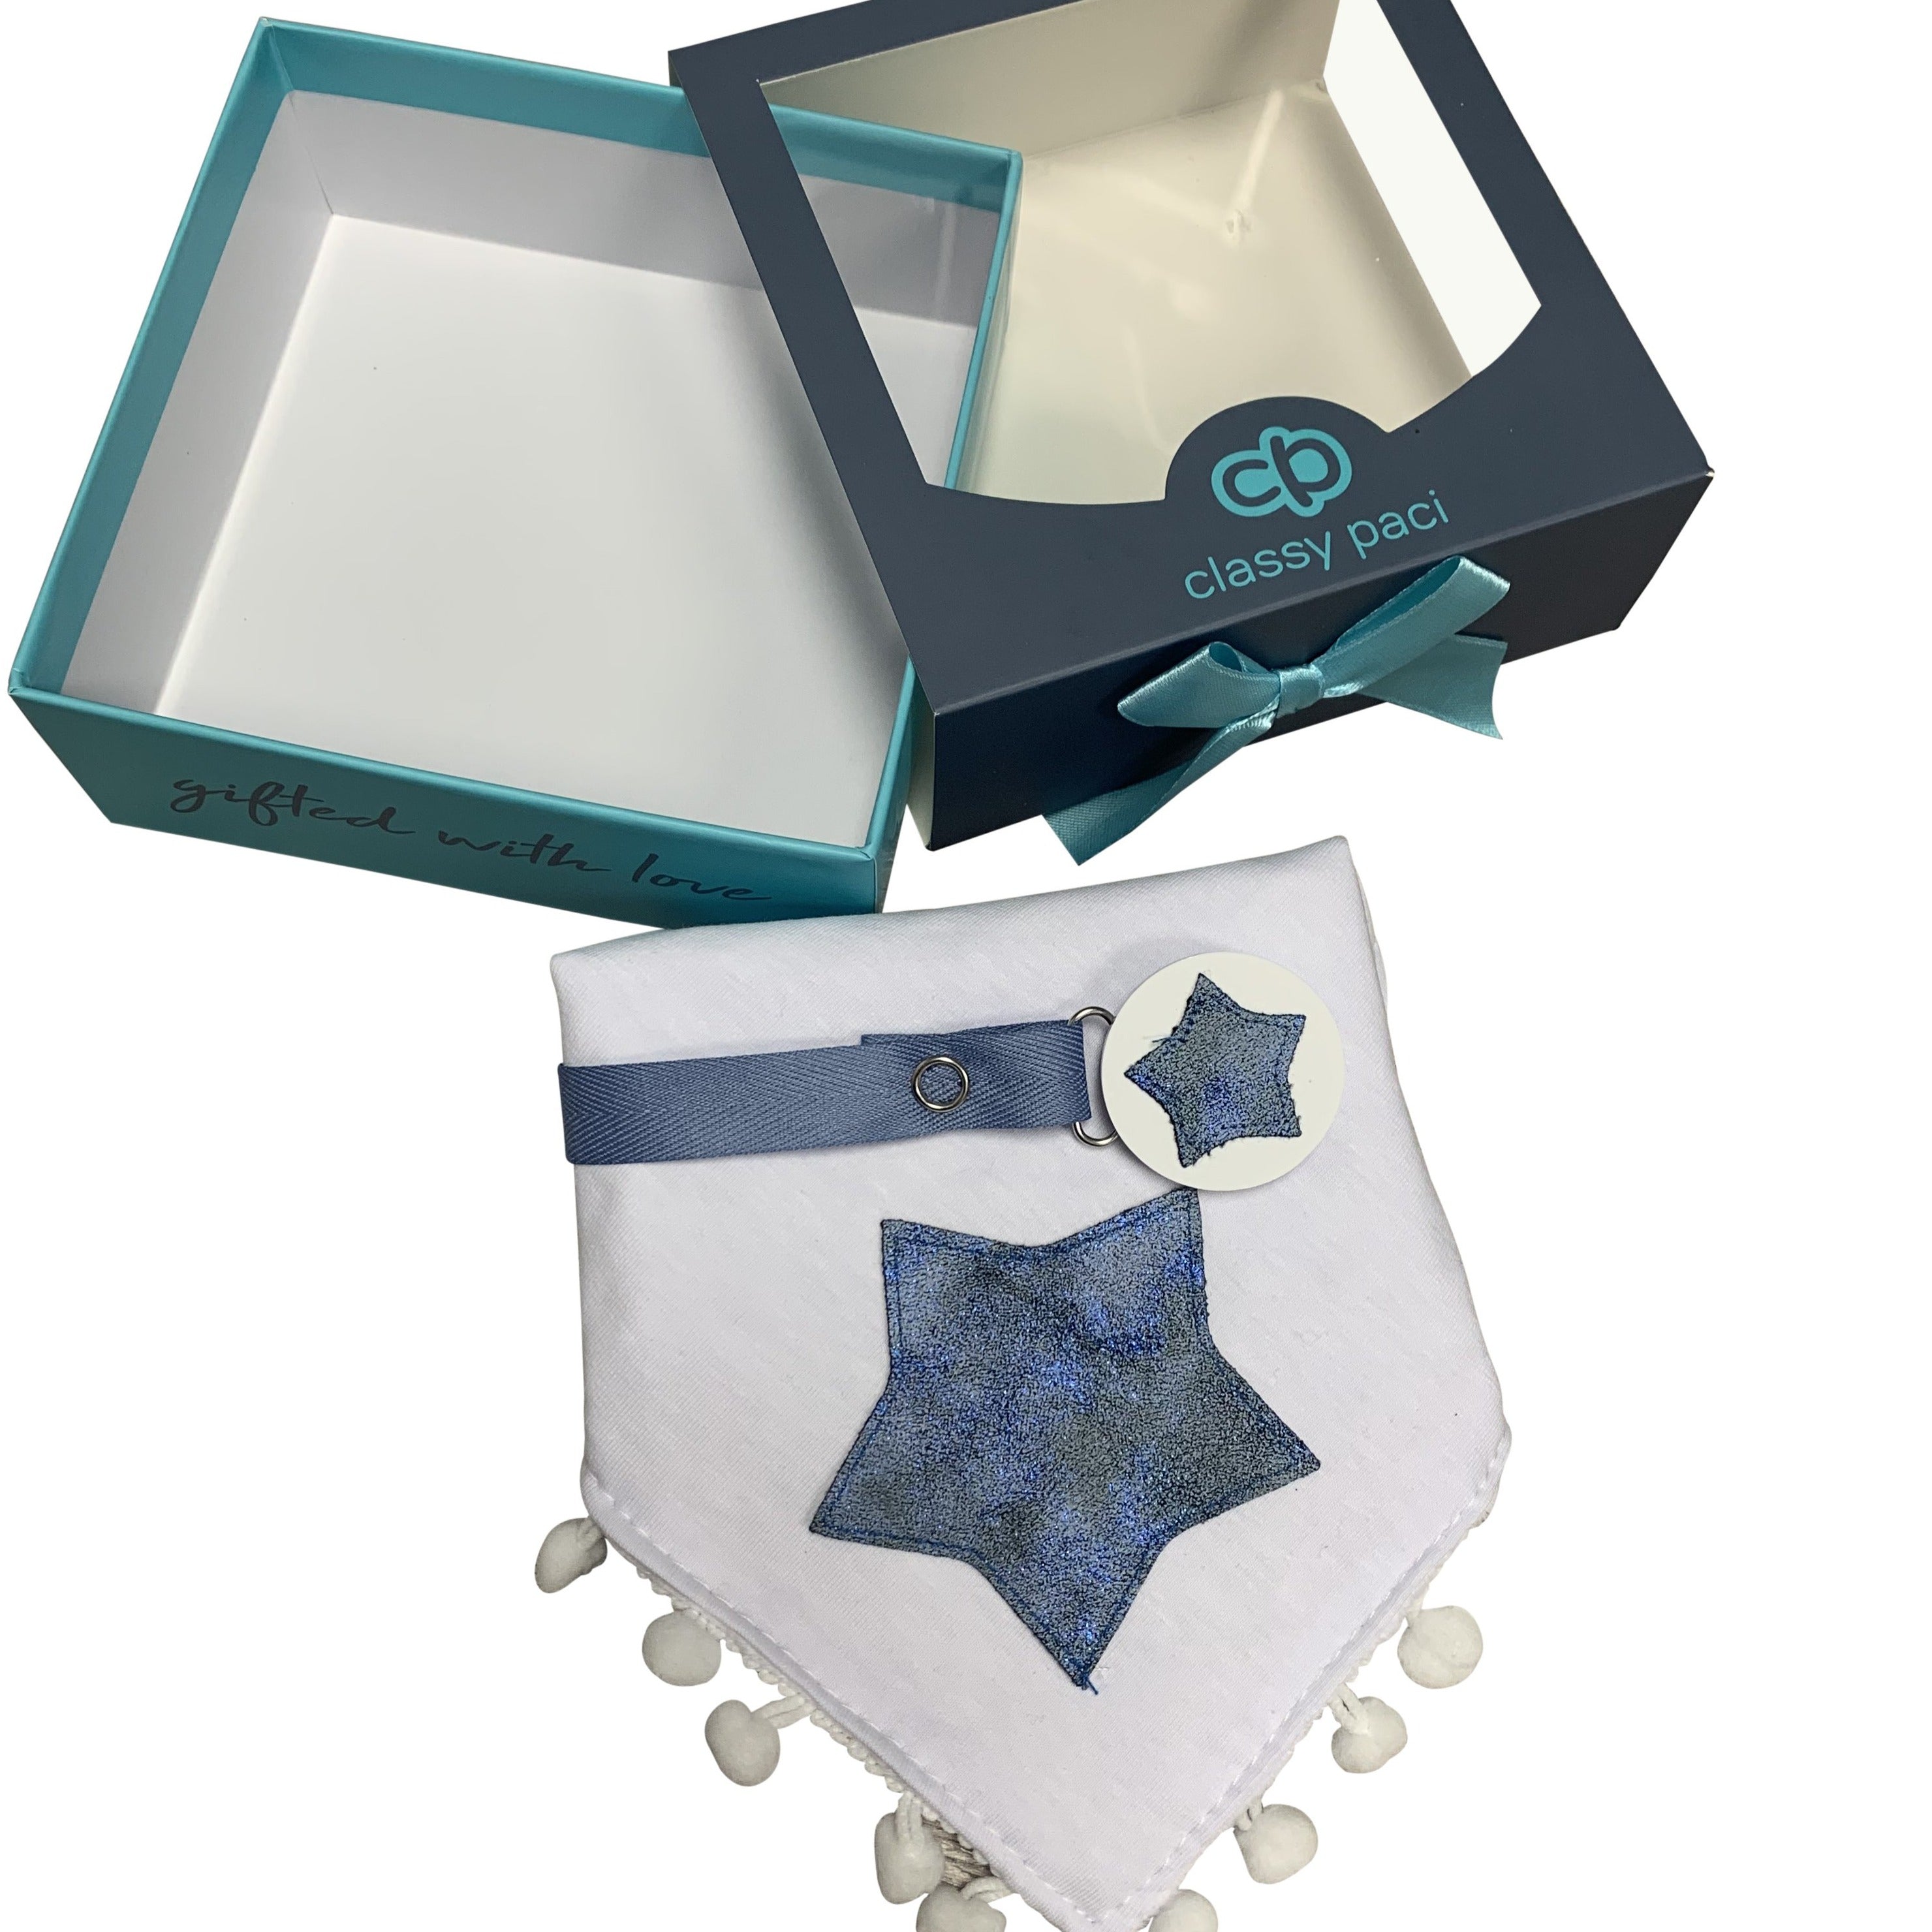 Blue Sparkle leather Star bib and clip GIFT SET